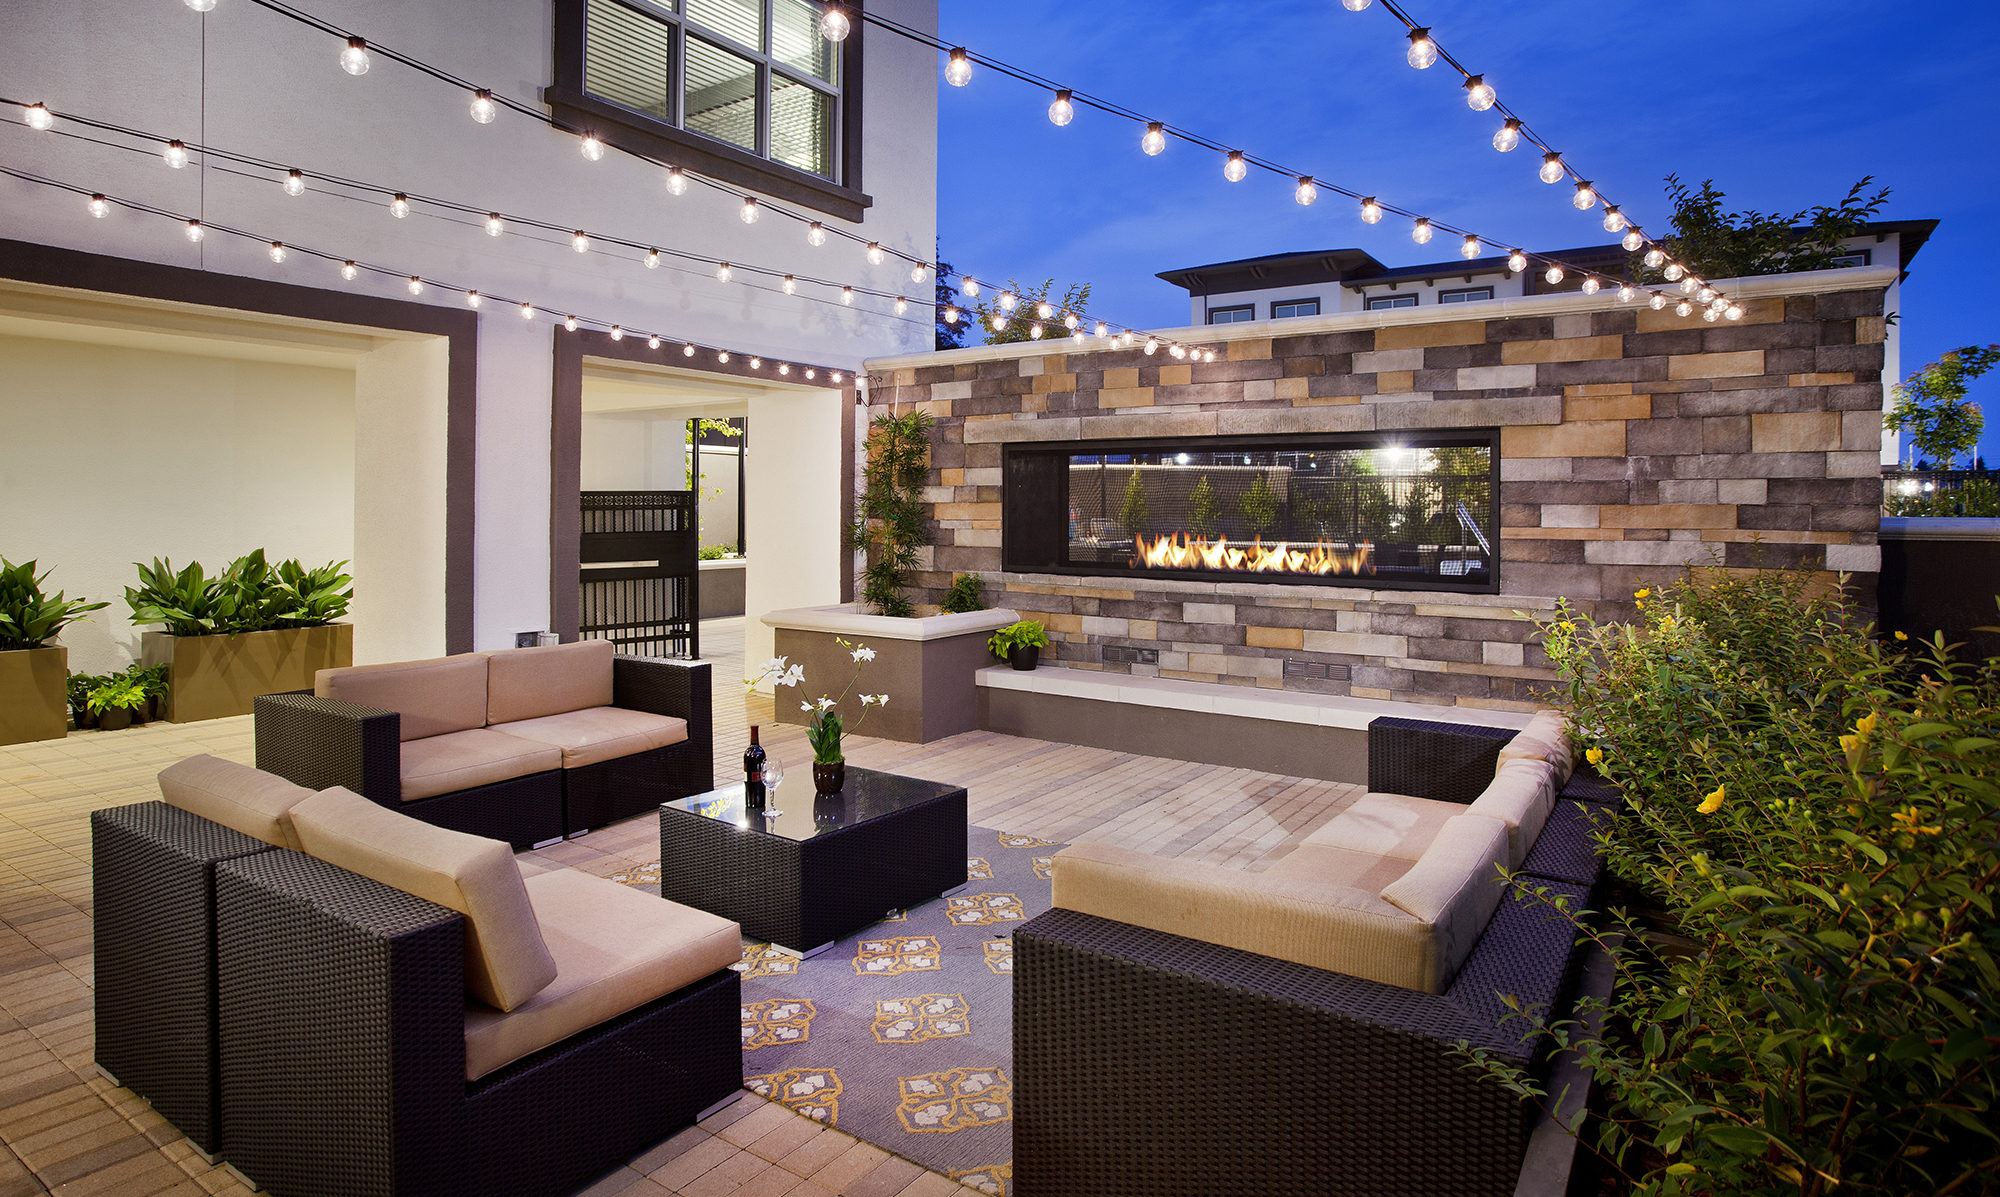 Patio space with fireplace, seating and hang lights surrounded by planters.